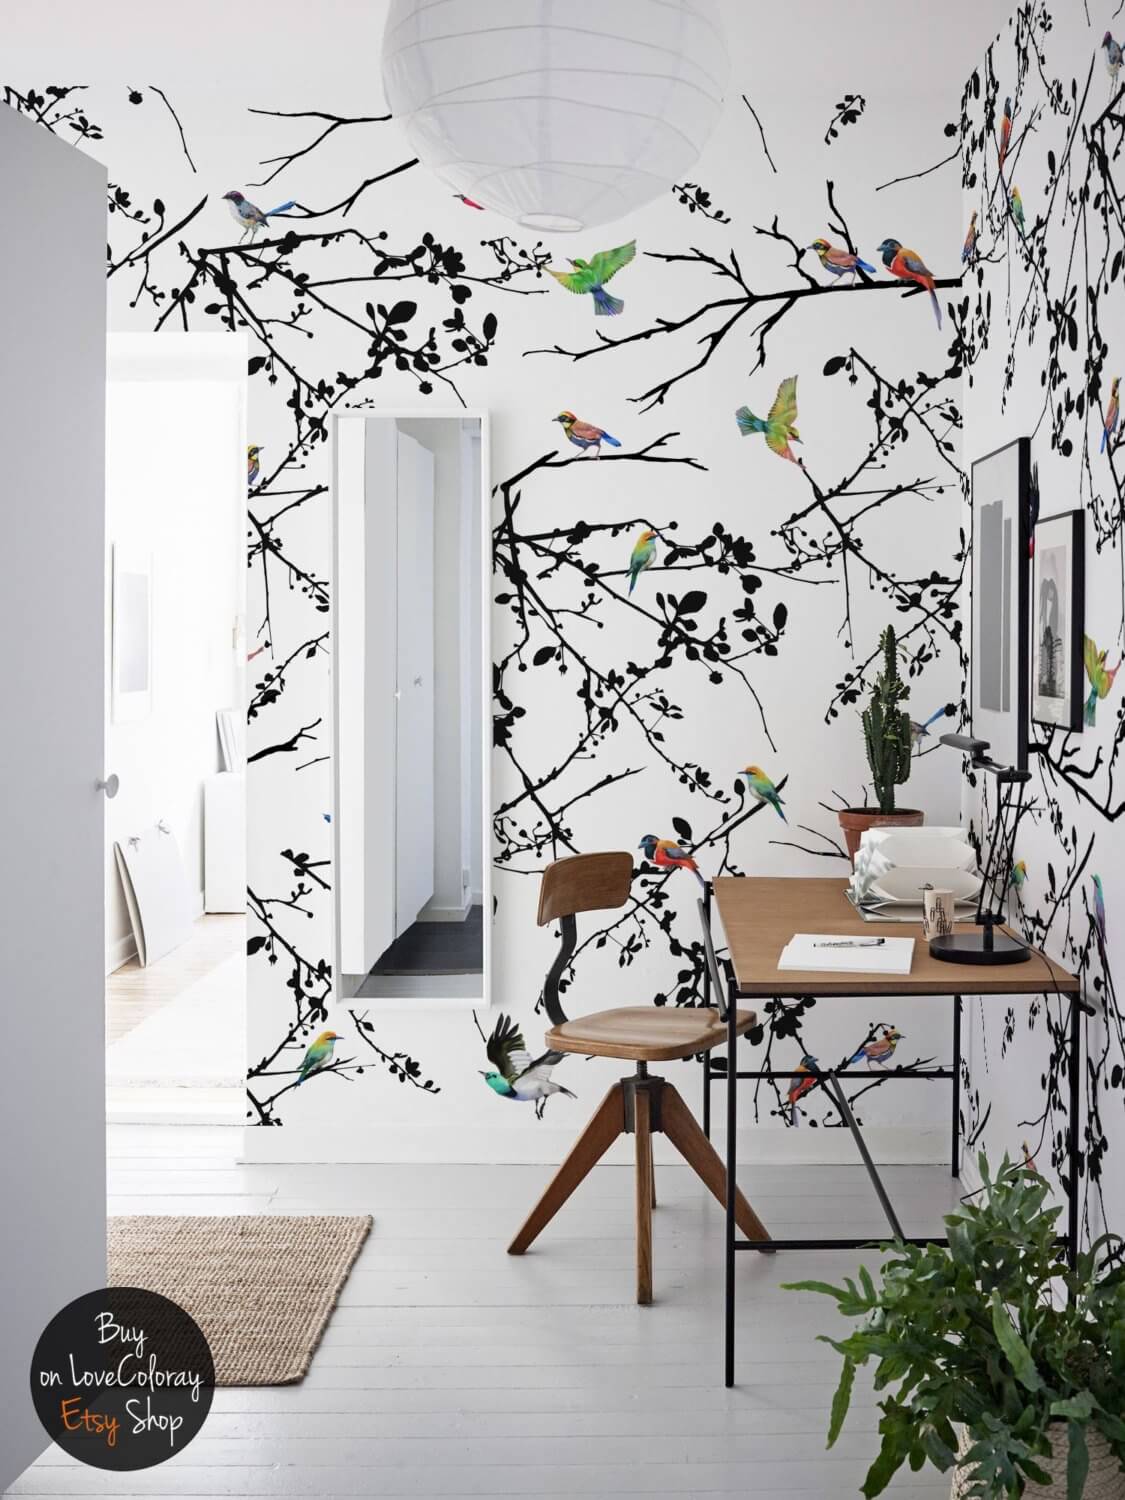 Whole Wall Bird and Branch Decor